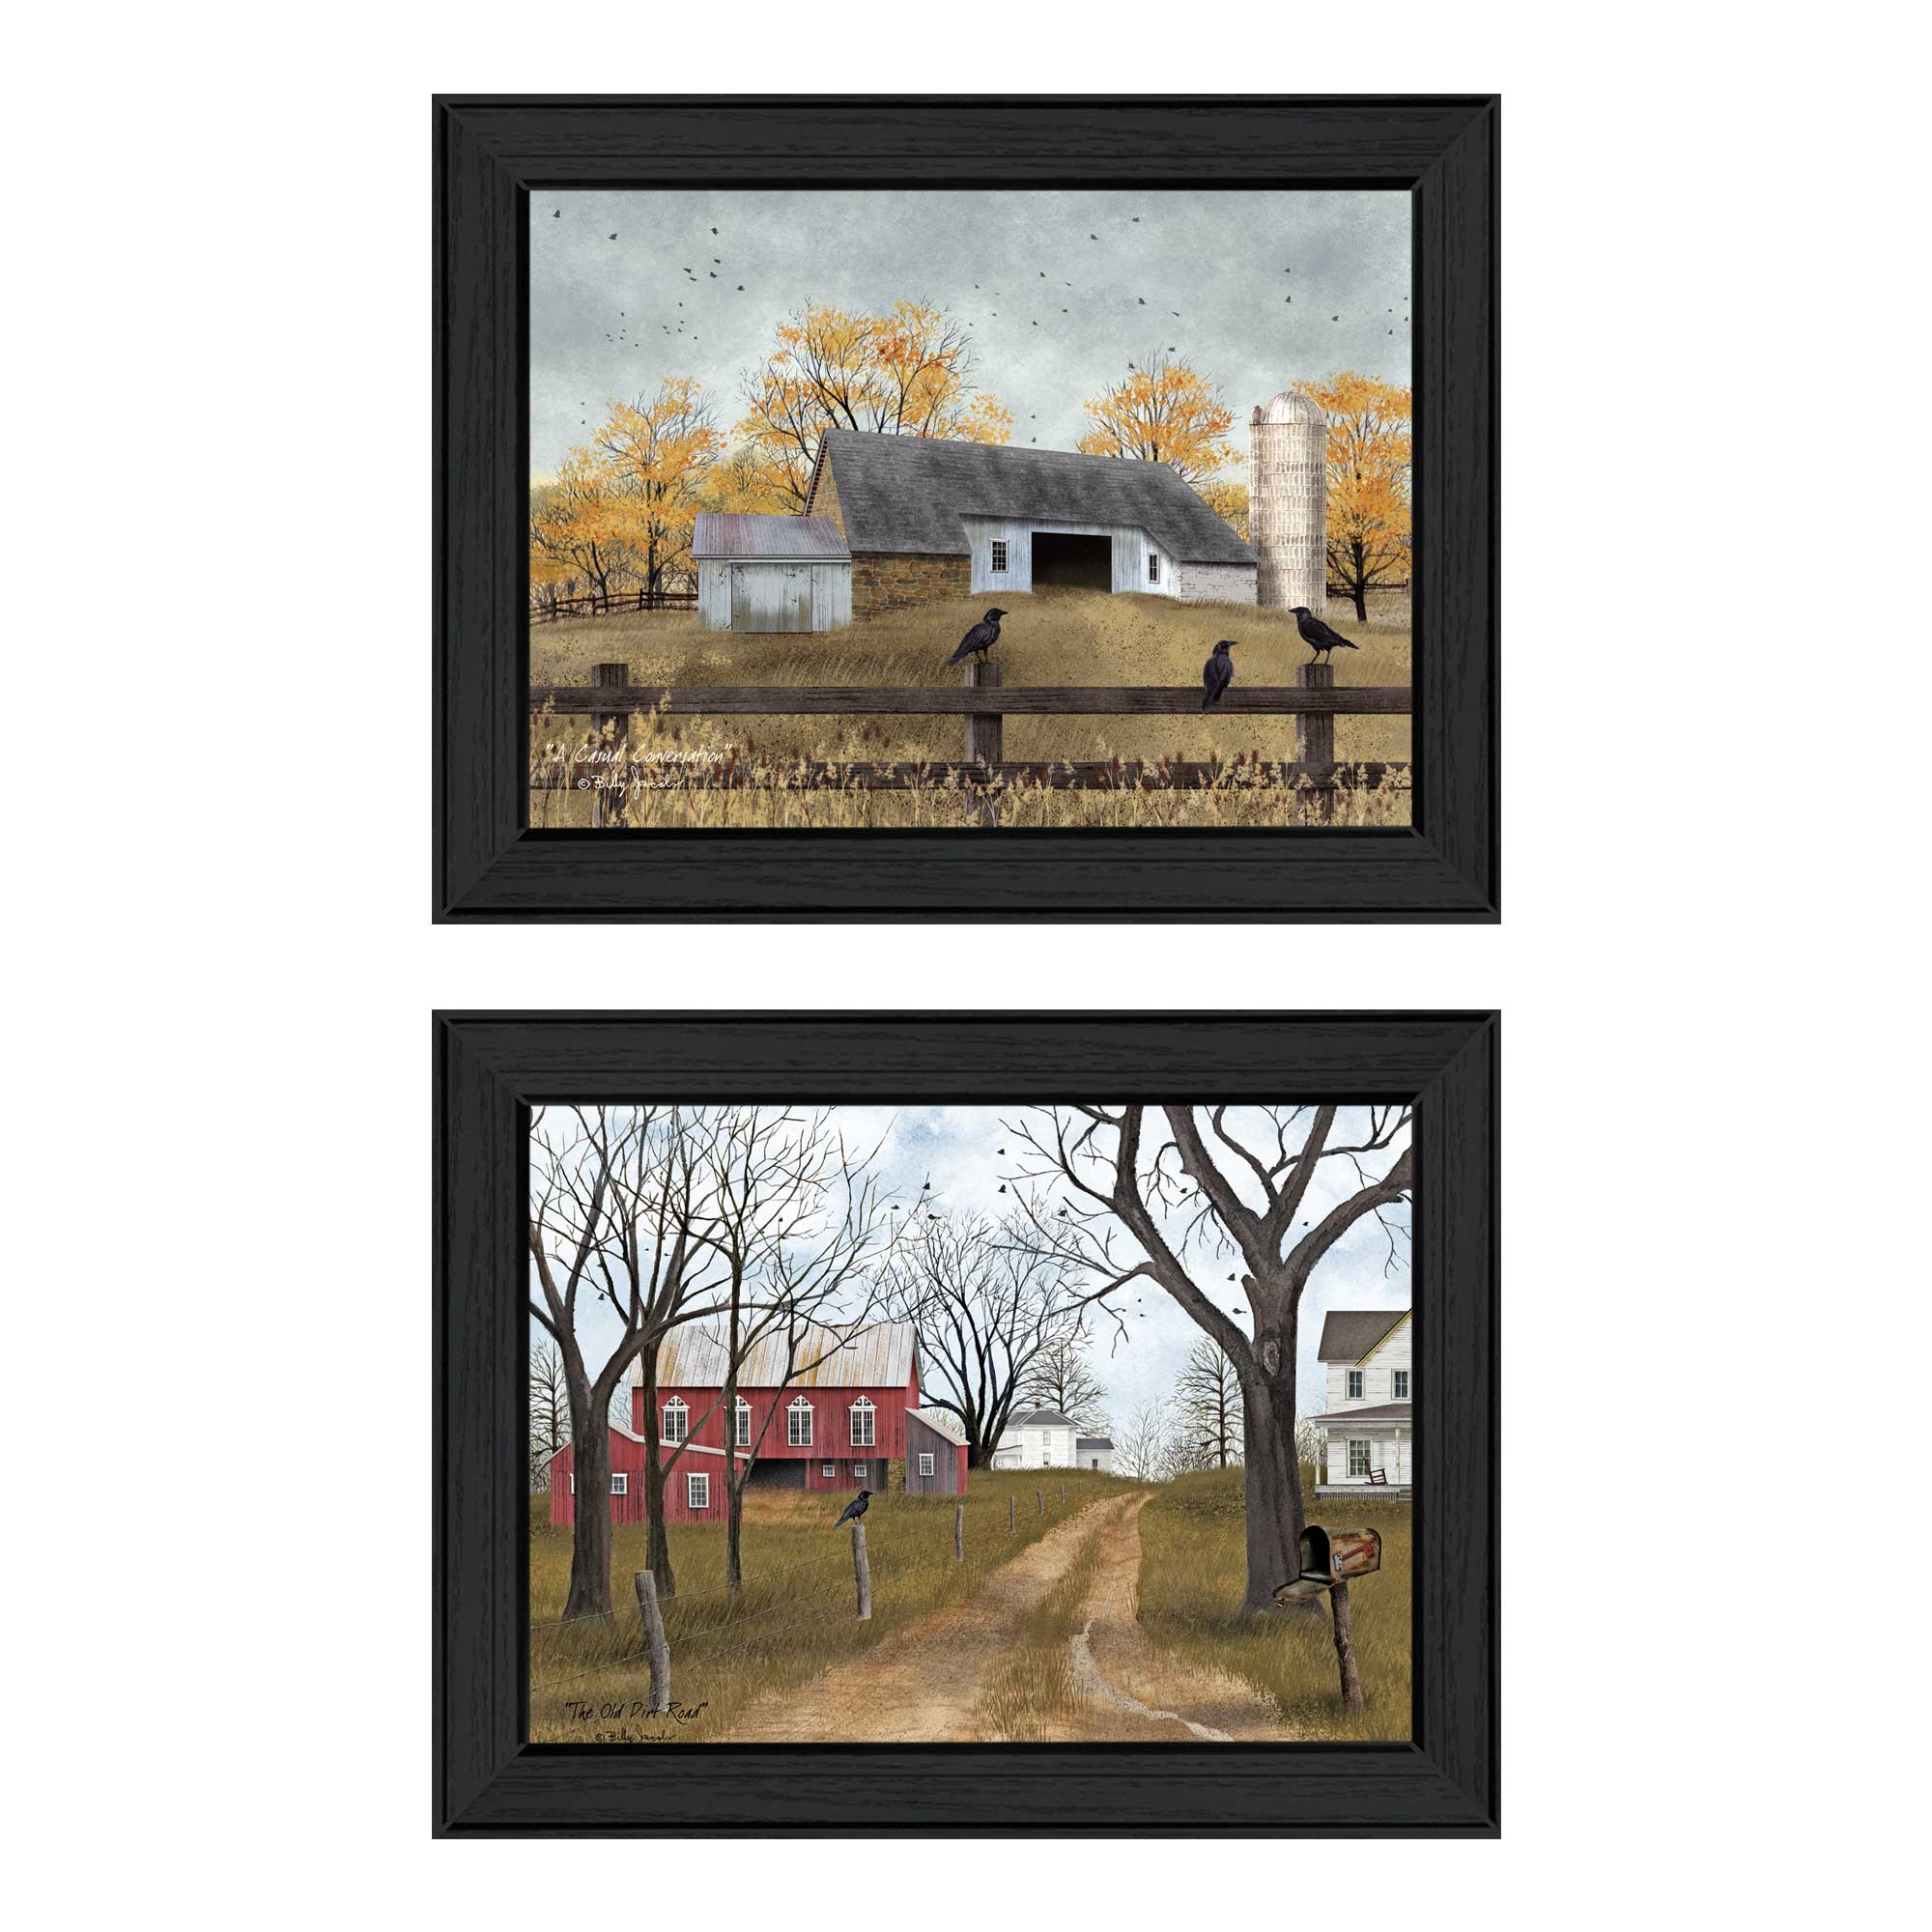 Trendy Decor 4U "Country Roads" Framed Wall Art, Modern Home Decor Framed Print for Living Room, Bedroom & Farmhouse Wall Decoration by Billy Jacobs